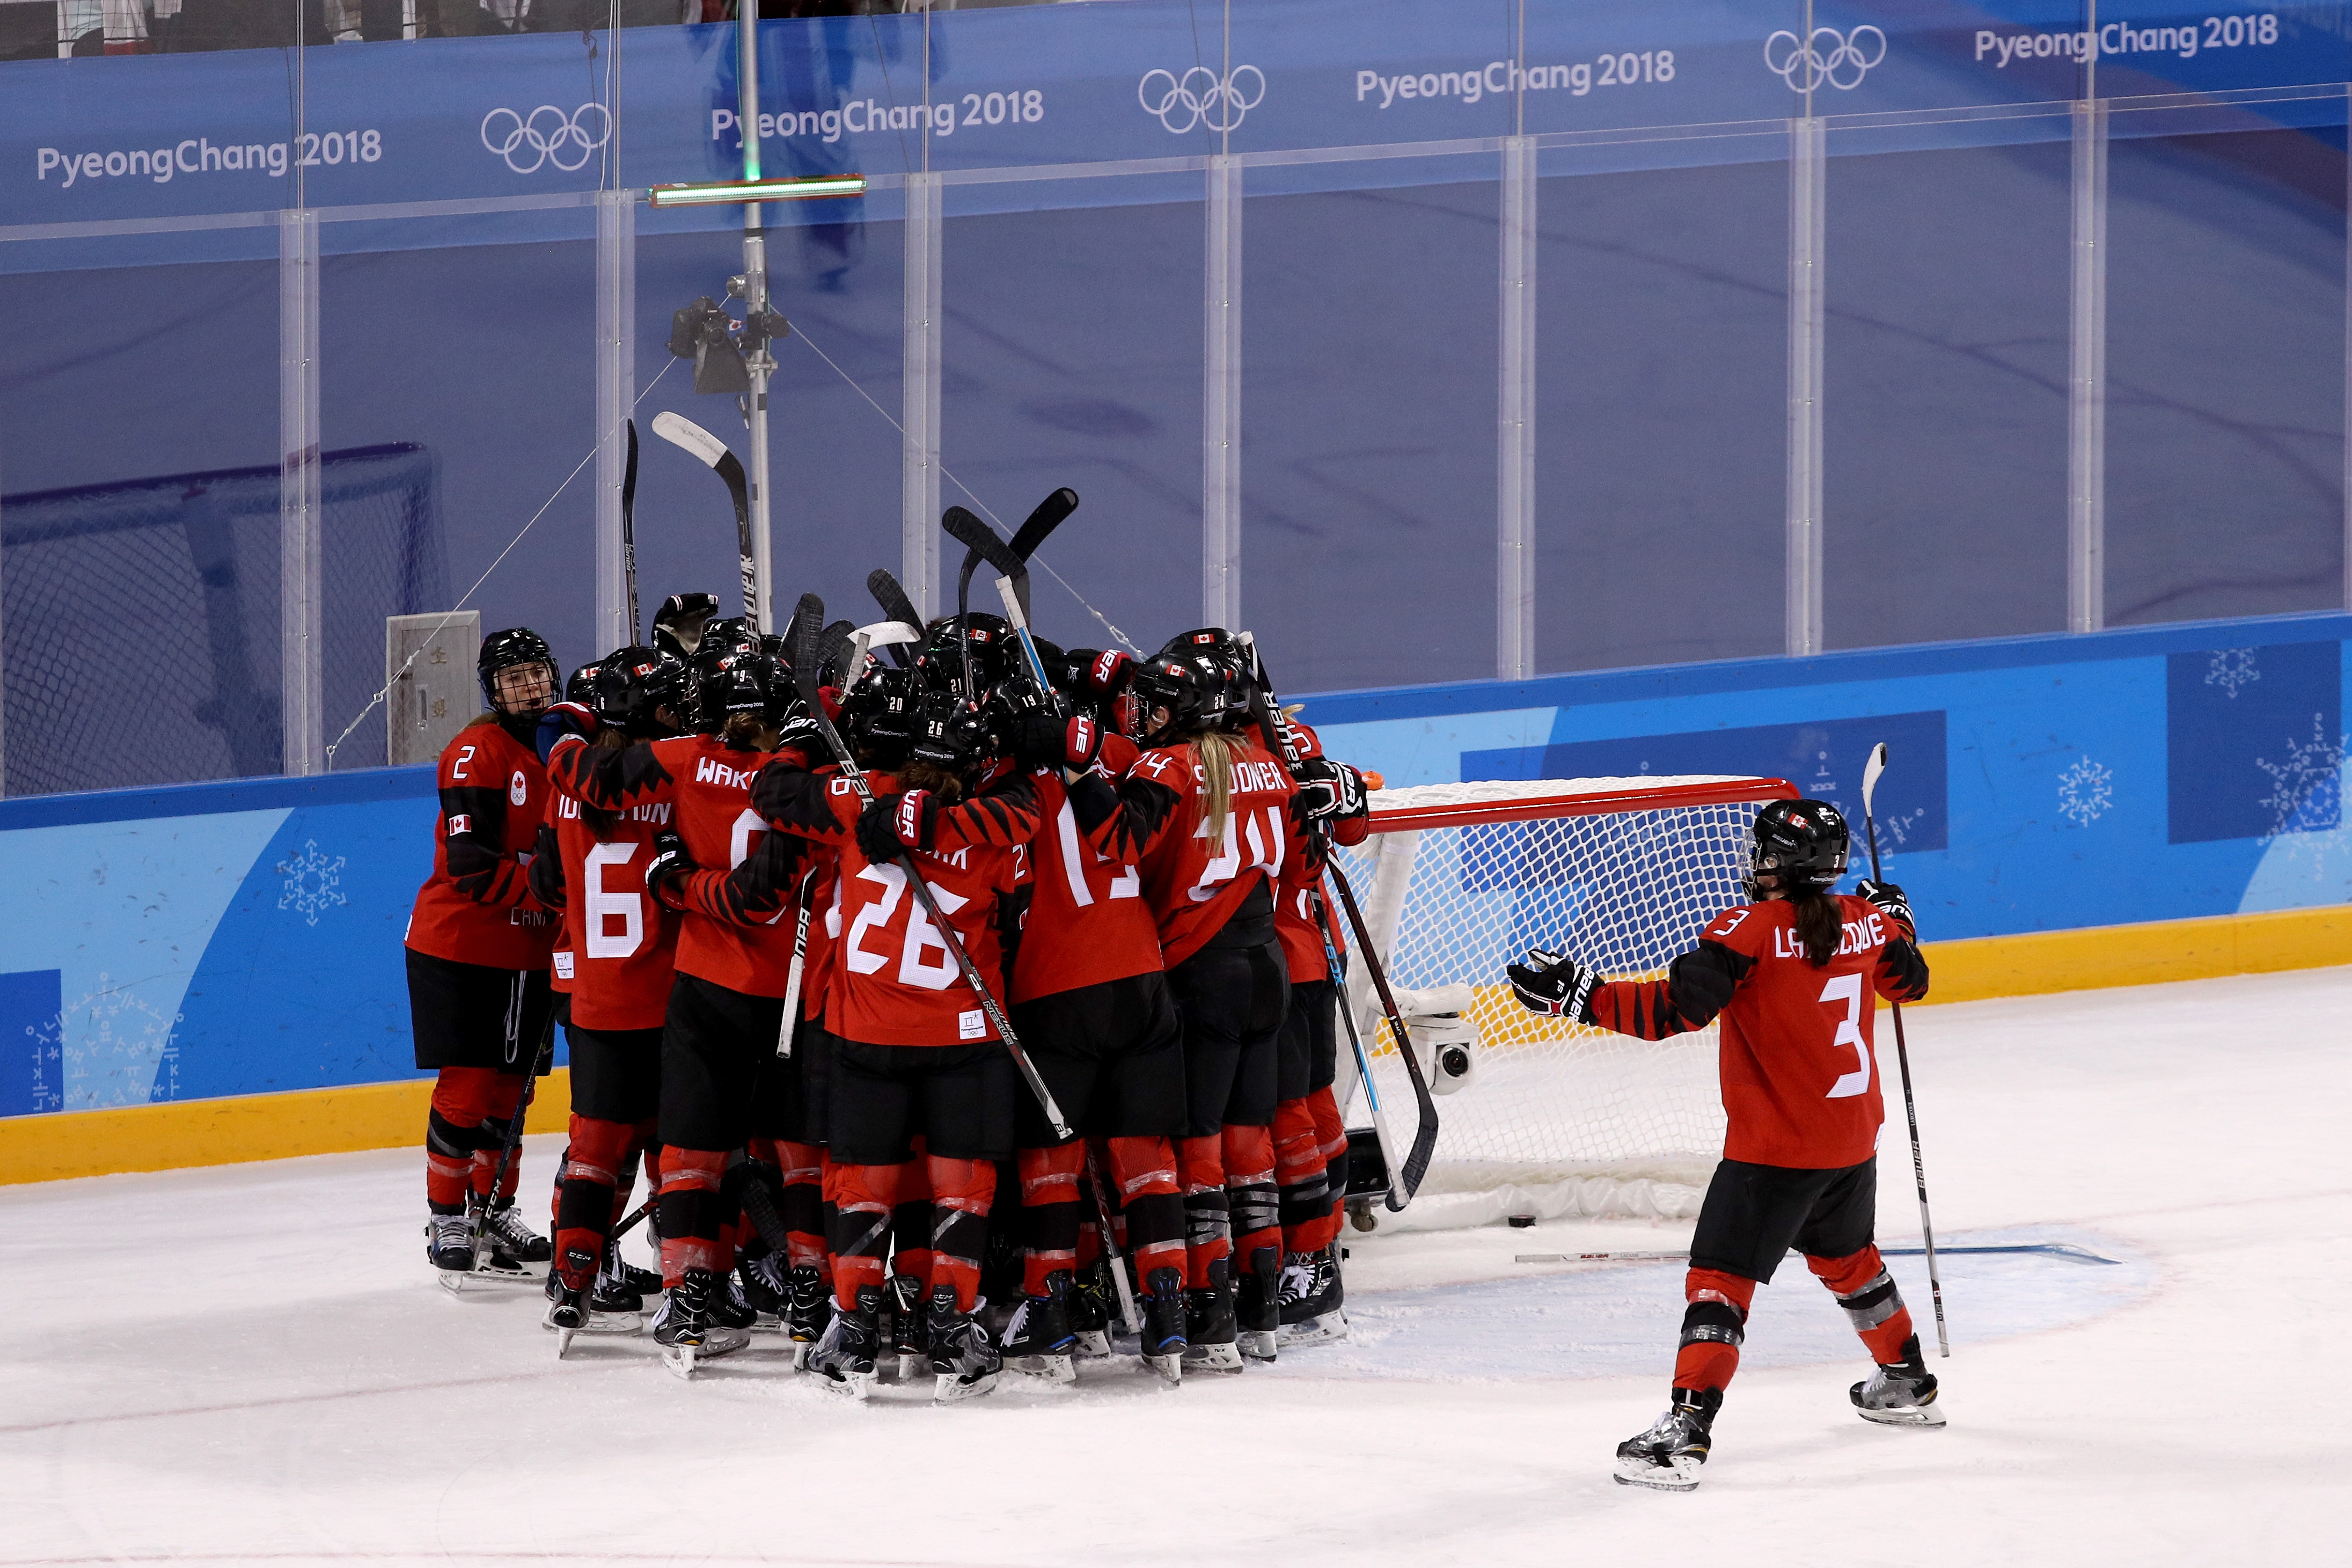 Canada celebrates after defeating the United States 2-1 during the Women's Ice Hockey Preliminary Round Group A game on day six of the PyeongChang 2018 Winter Olympic Games at Kwandong Hockey Centre on February 15, 2018 in Gangneung, South Korea. (Maddie Meyer—Getty Images)